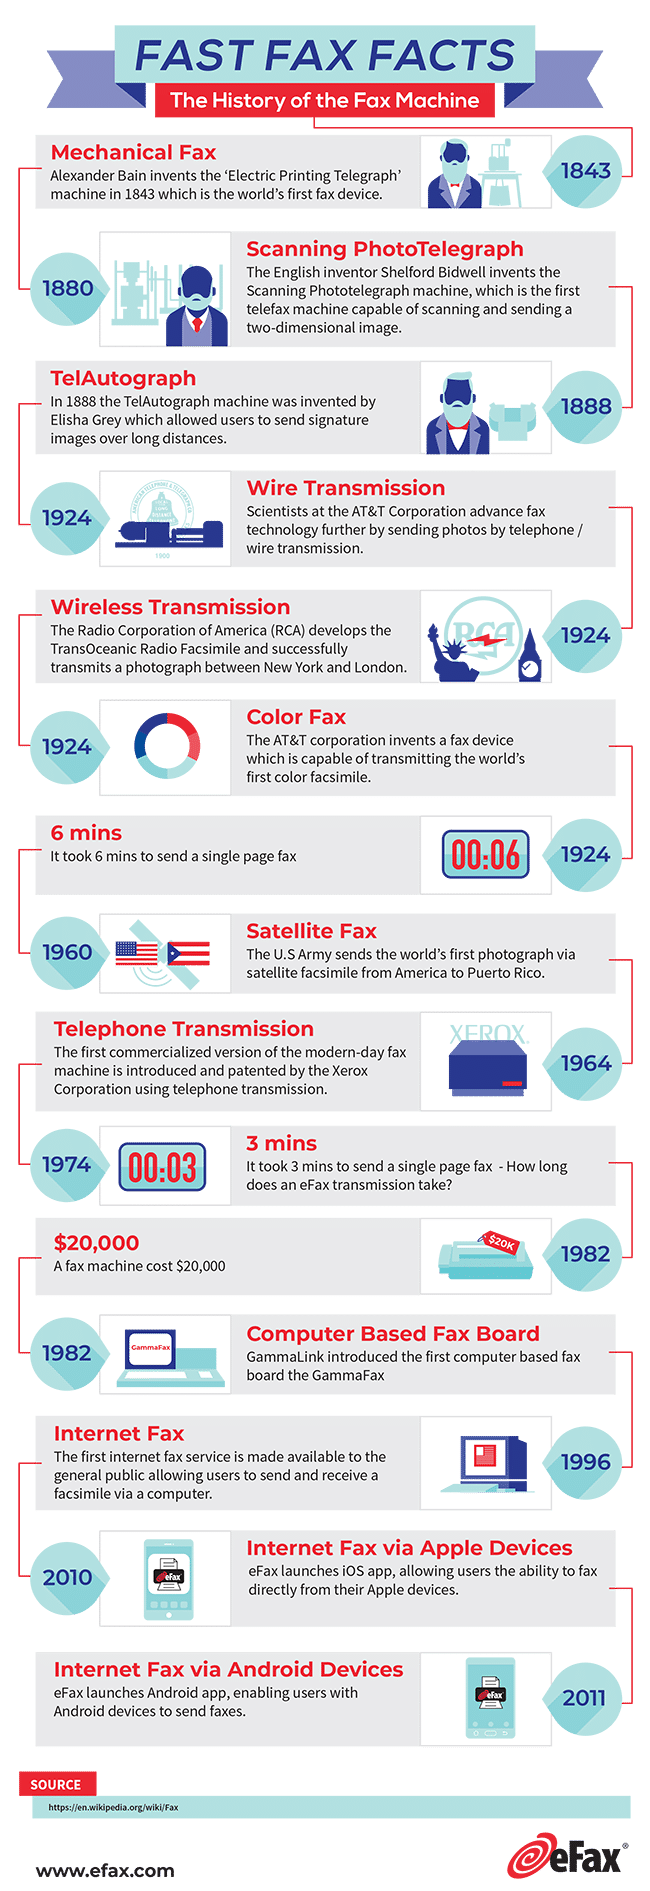 history-of-fax-infographic-735